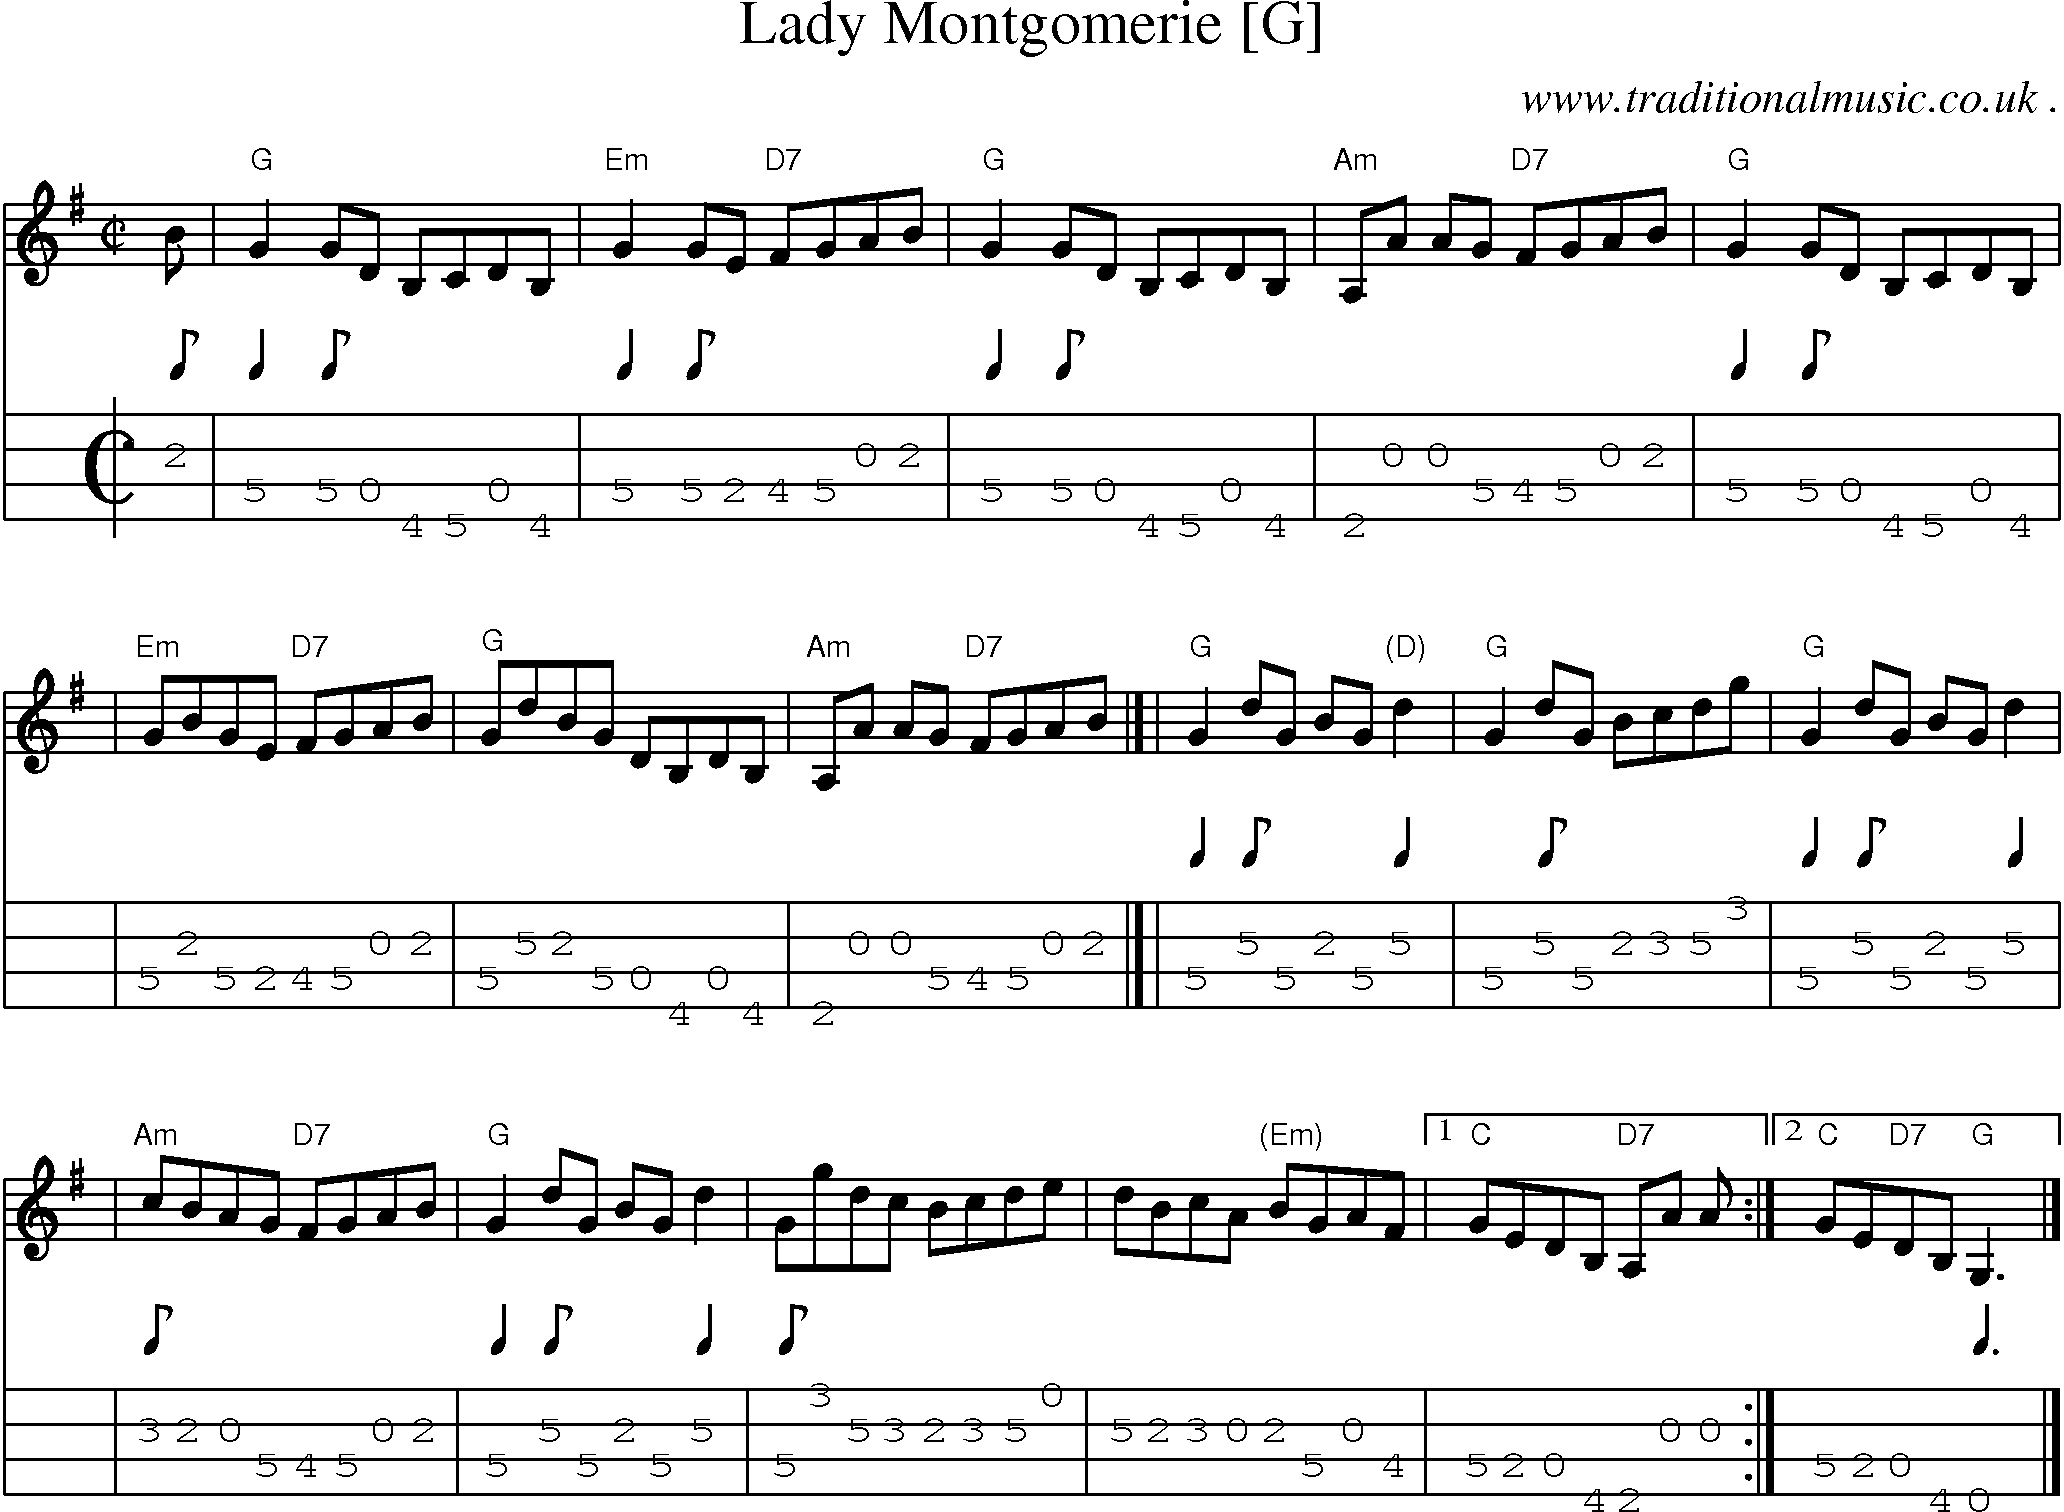 Sheet-music  score, Chords and Mandolin Tabs for Lady Montgomerie [g]